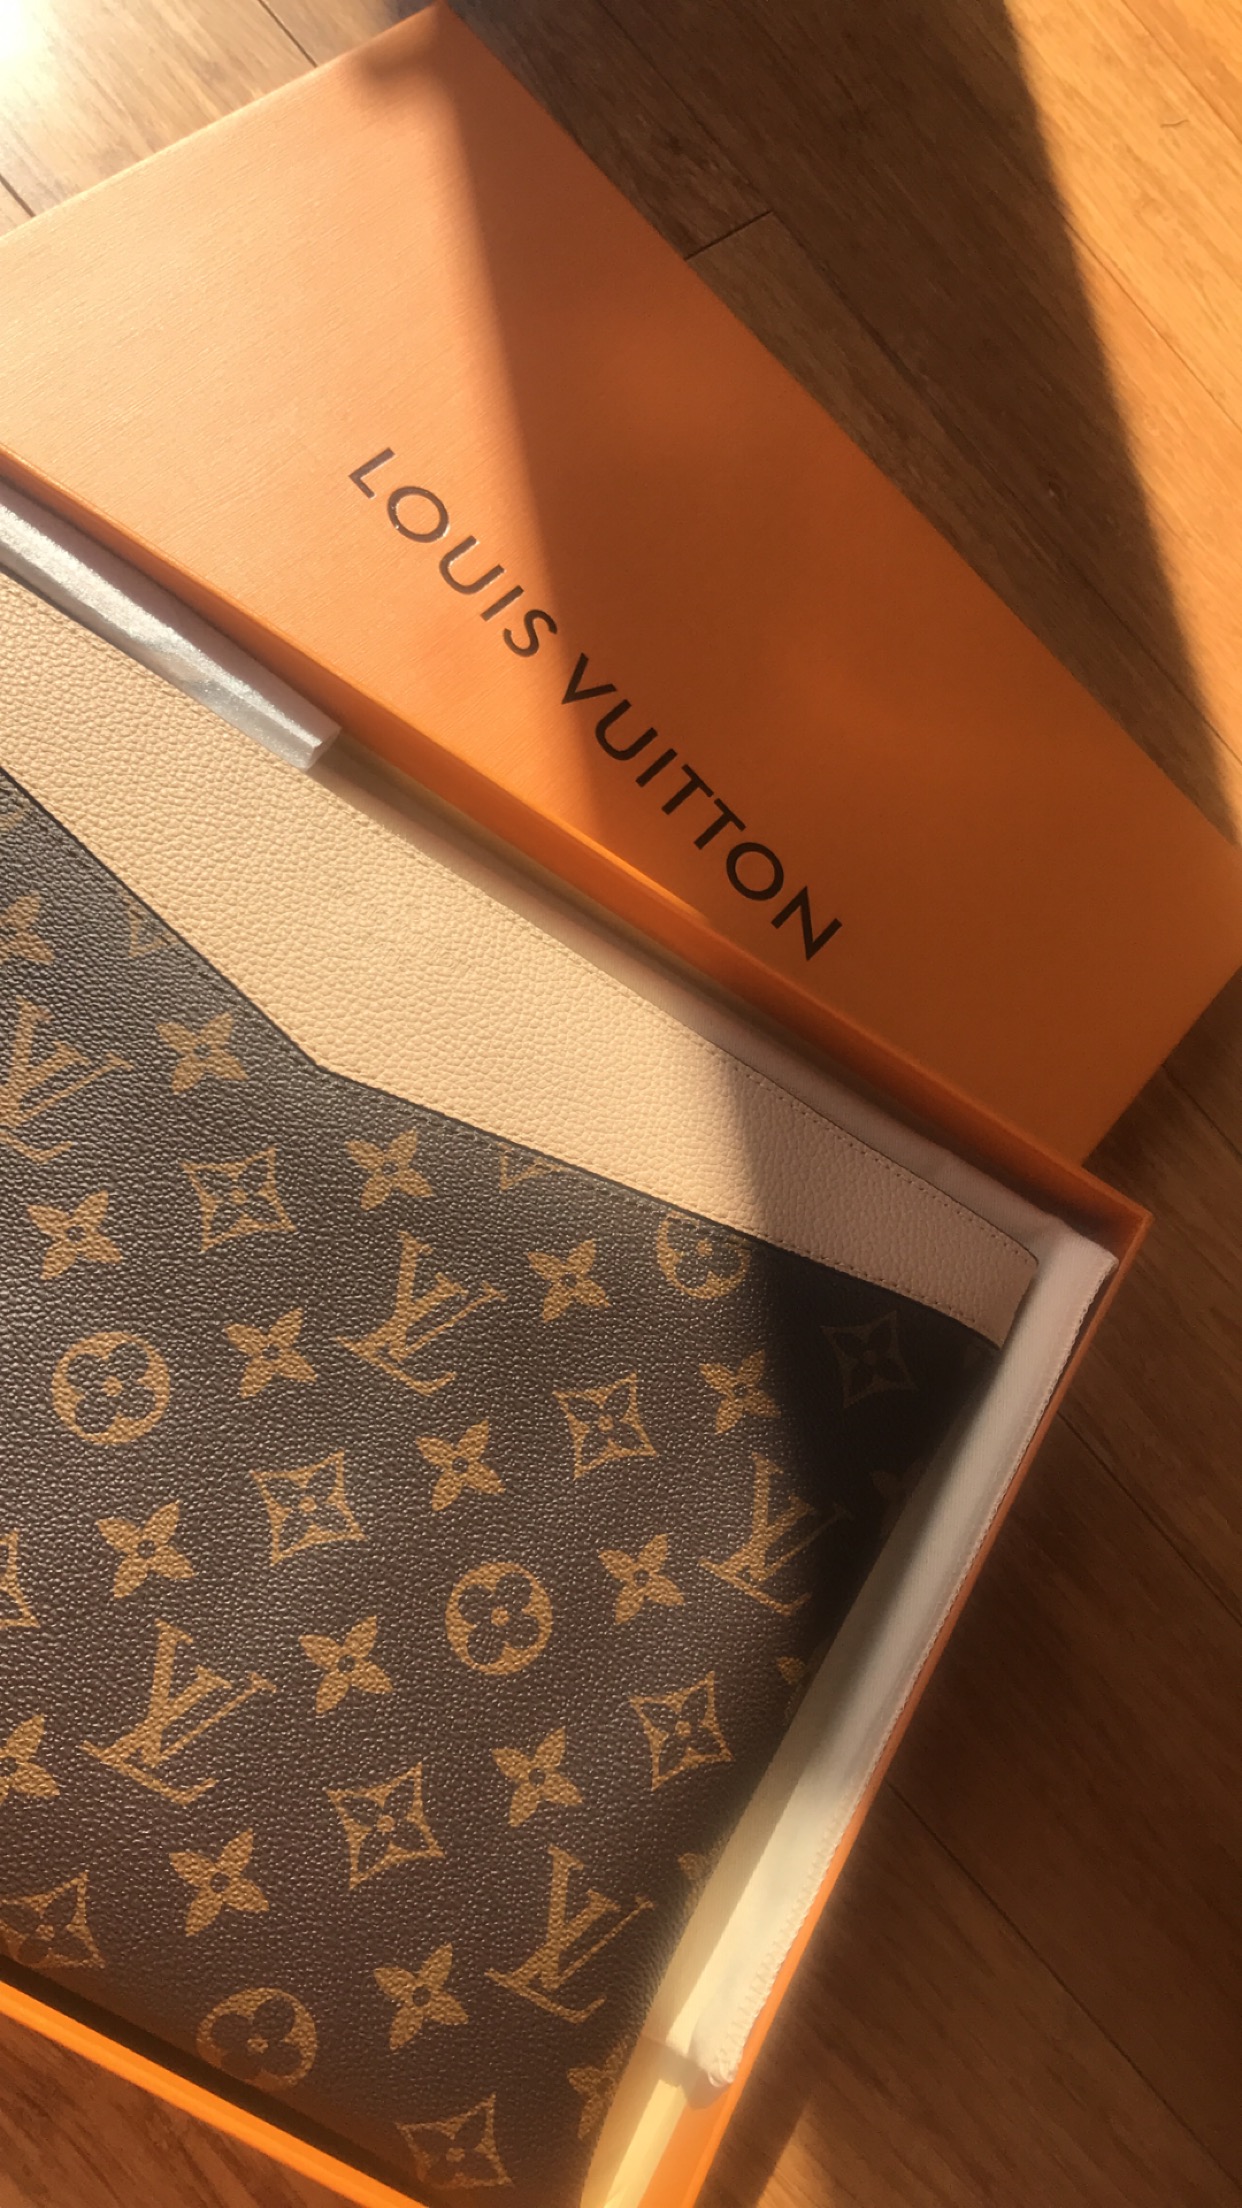 lv inspired bags review｜TikTok Search